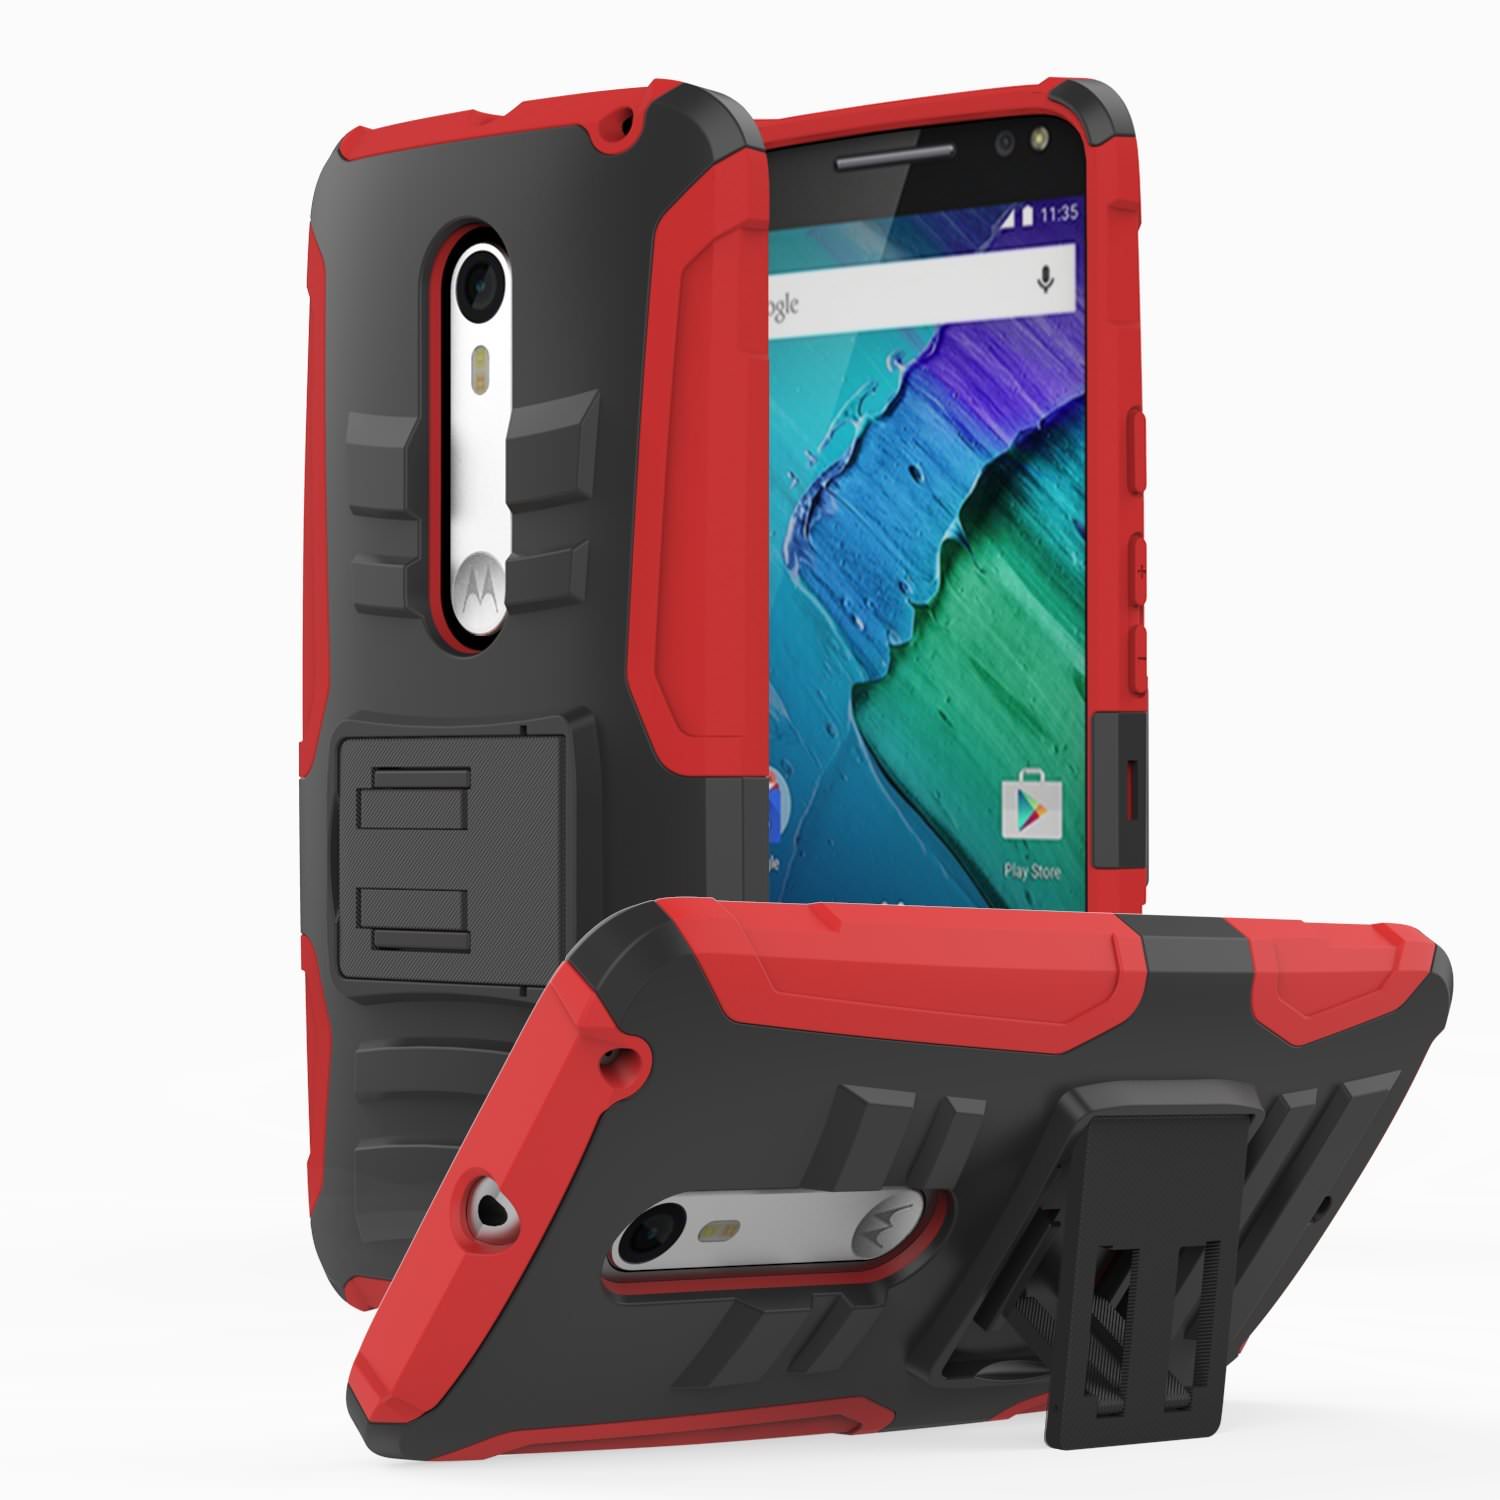 Rugged Case For Moto X Pure edition